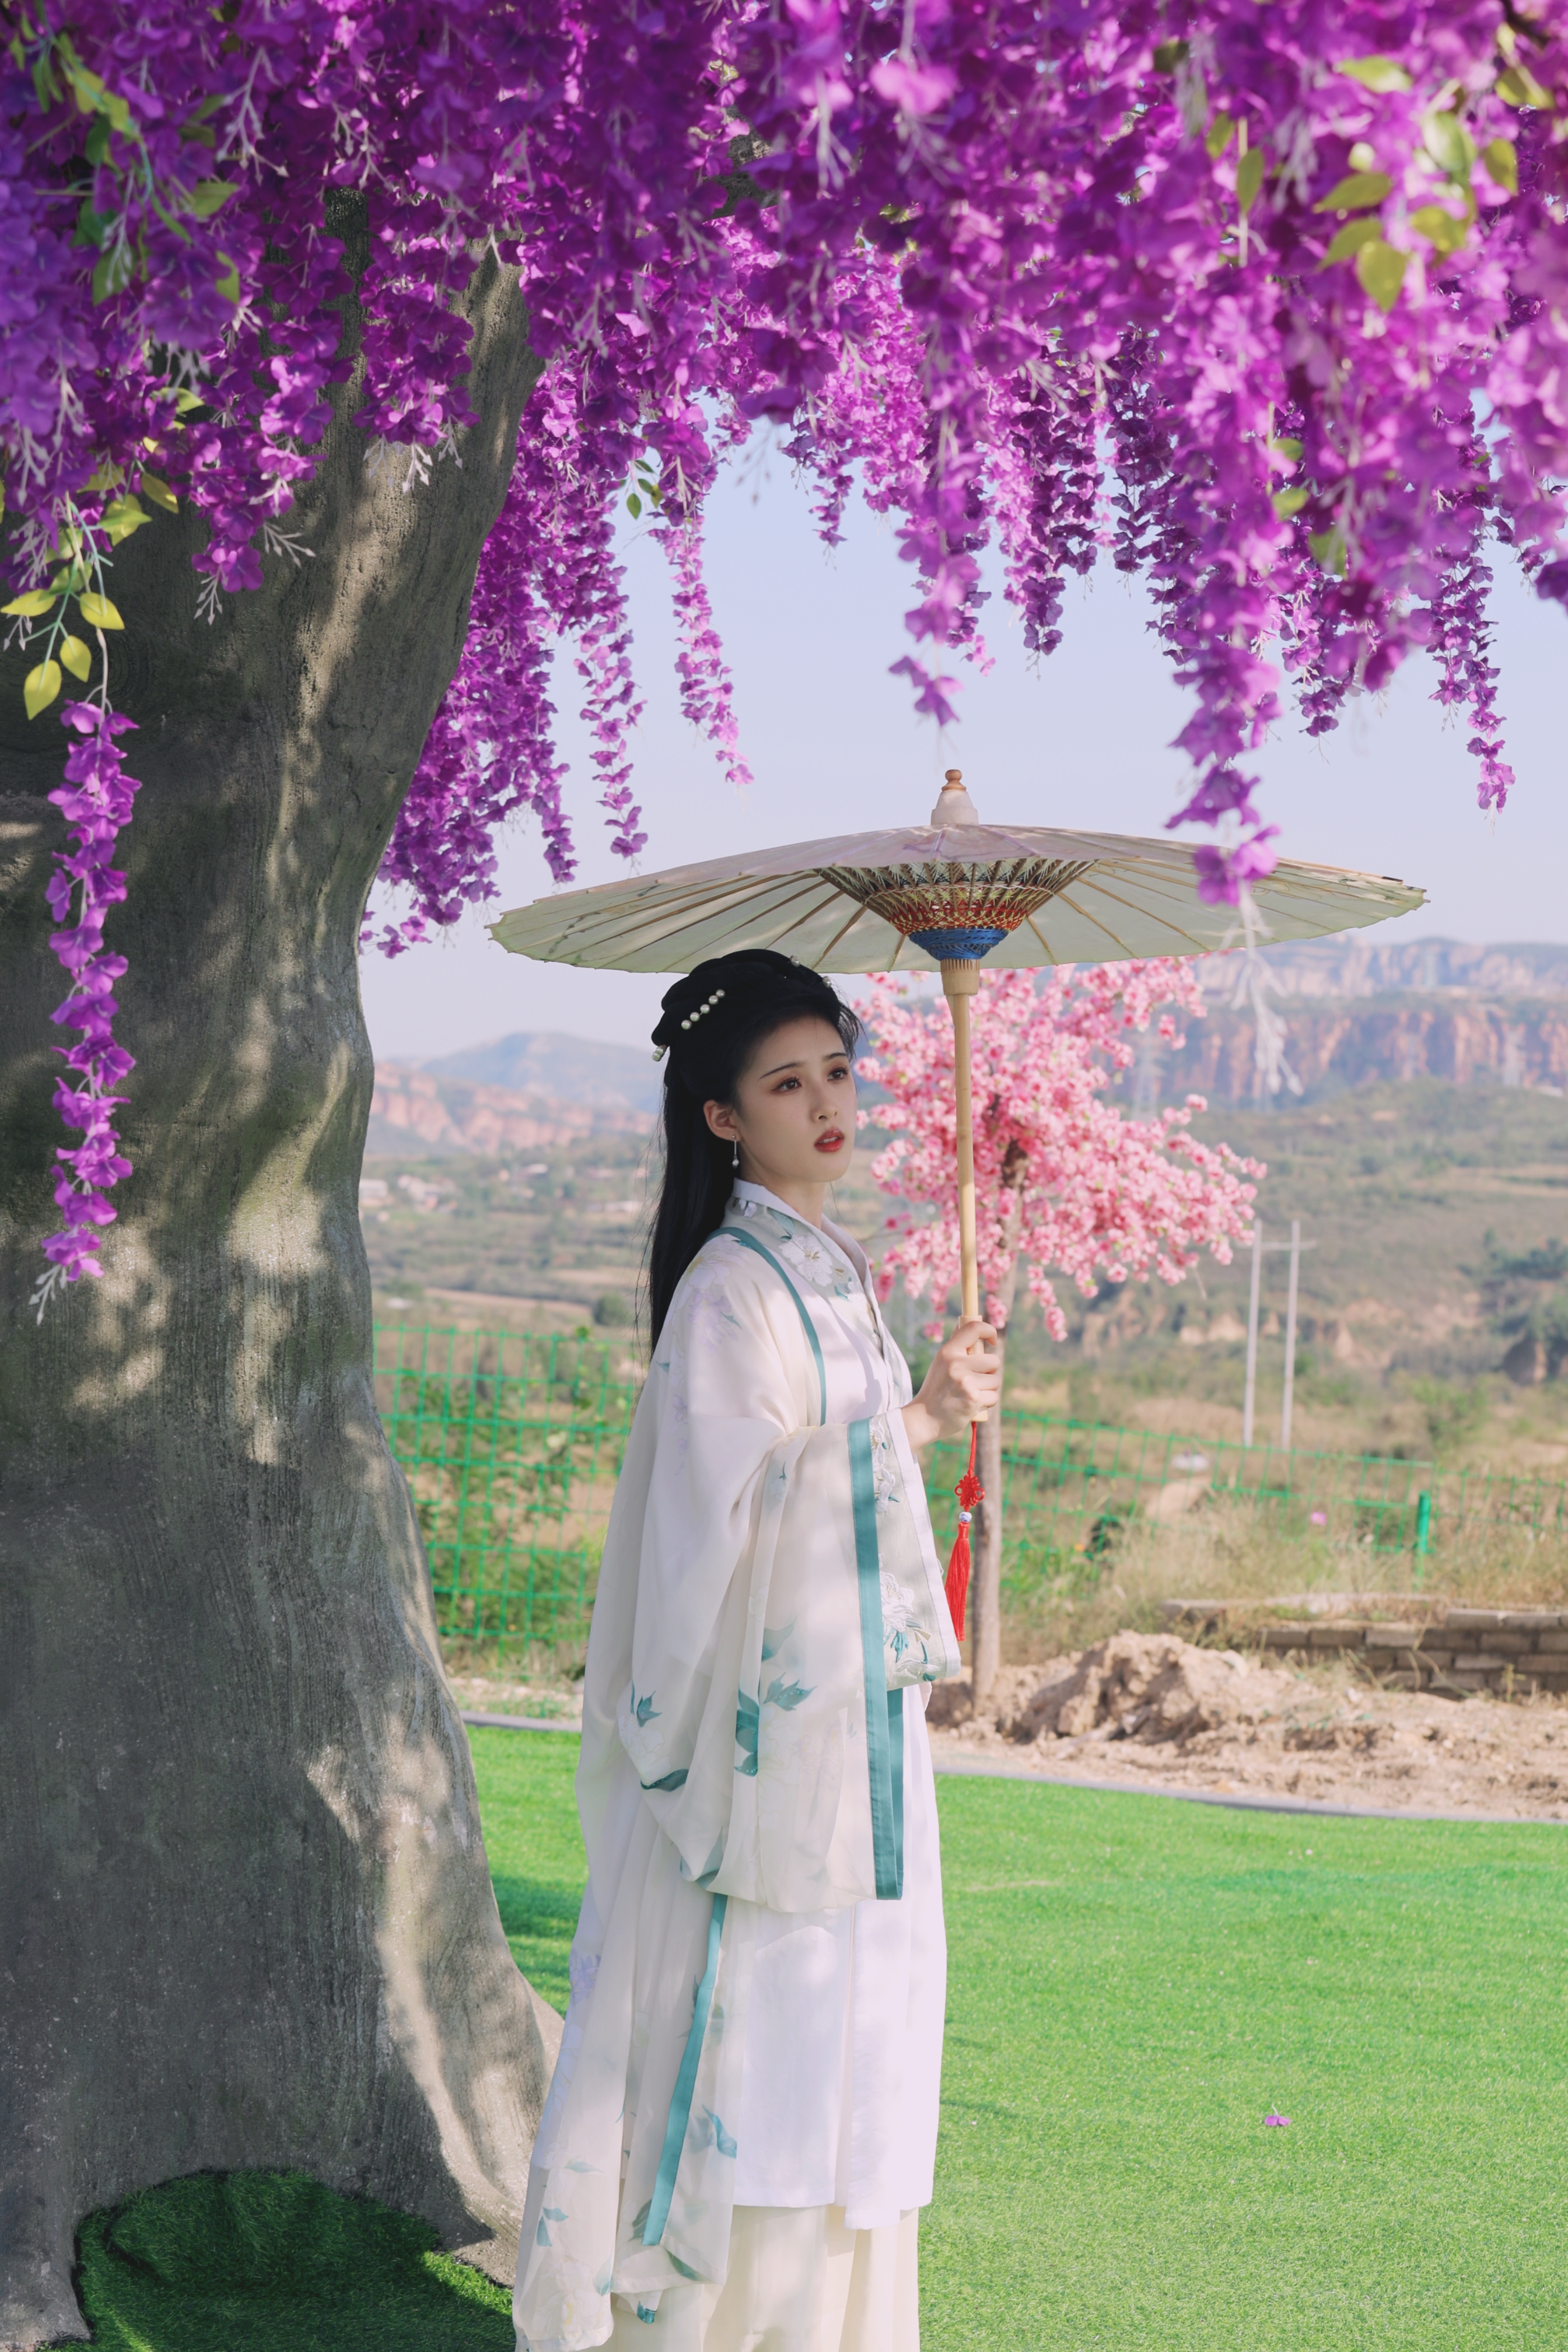 People 2688x4032 women Chinese parasol outdoors flowers Asian